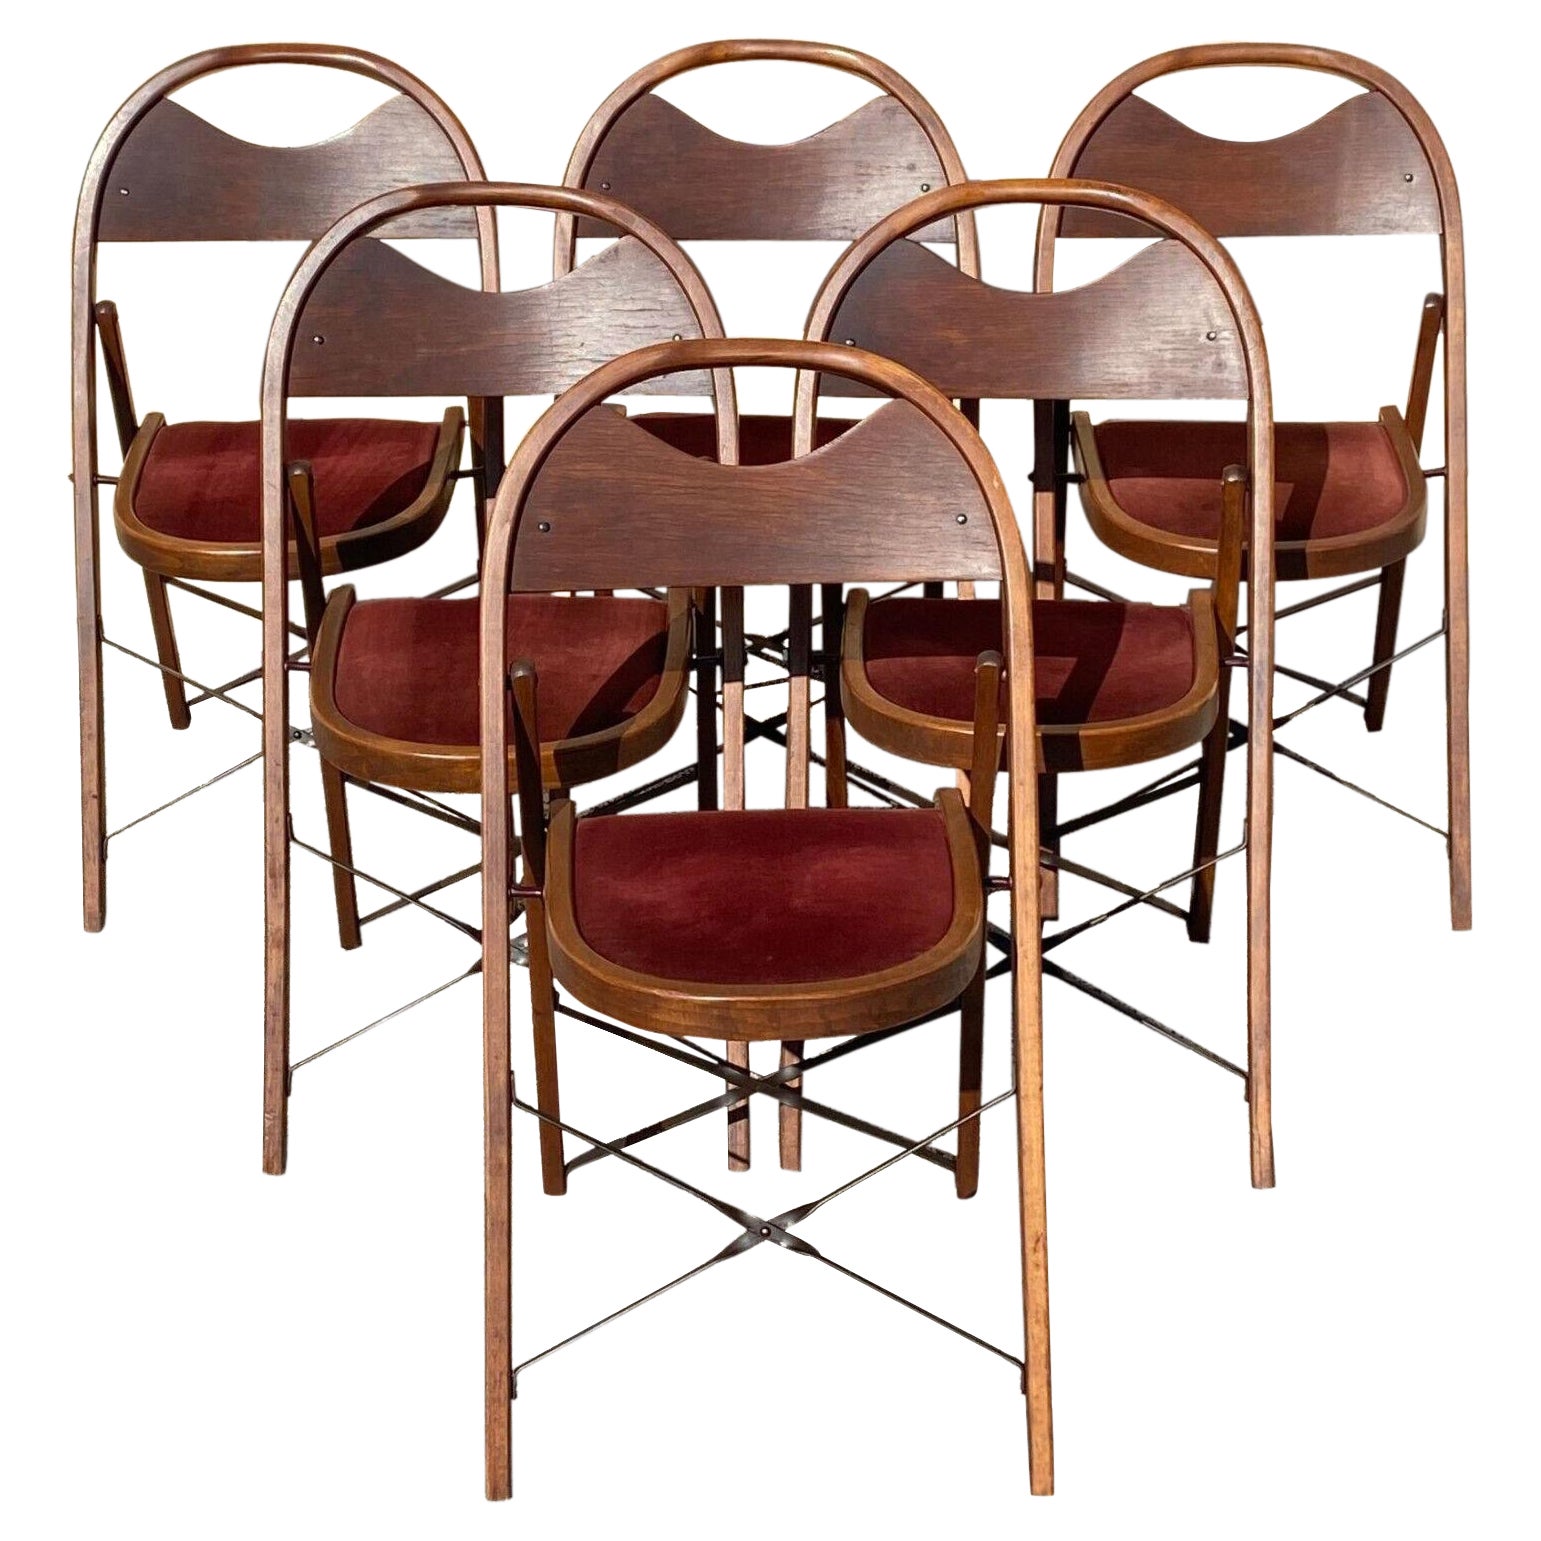 Vintage Art Deco Wooden Theatre Folding Chairs by General Sales Co Set of 6 'A' For Sale